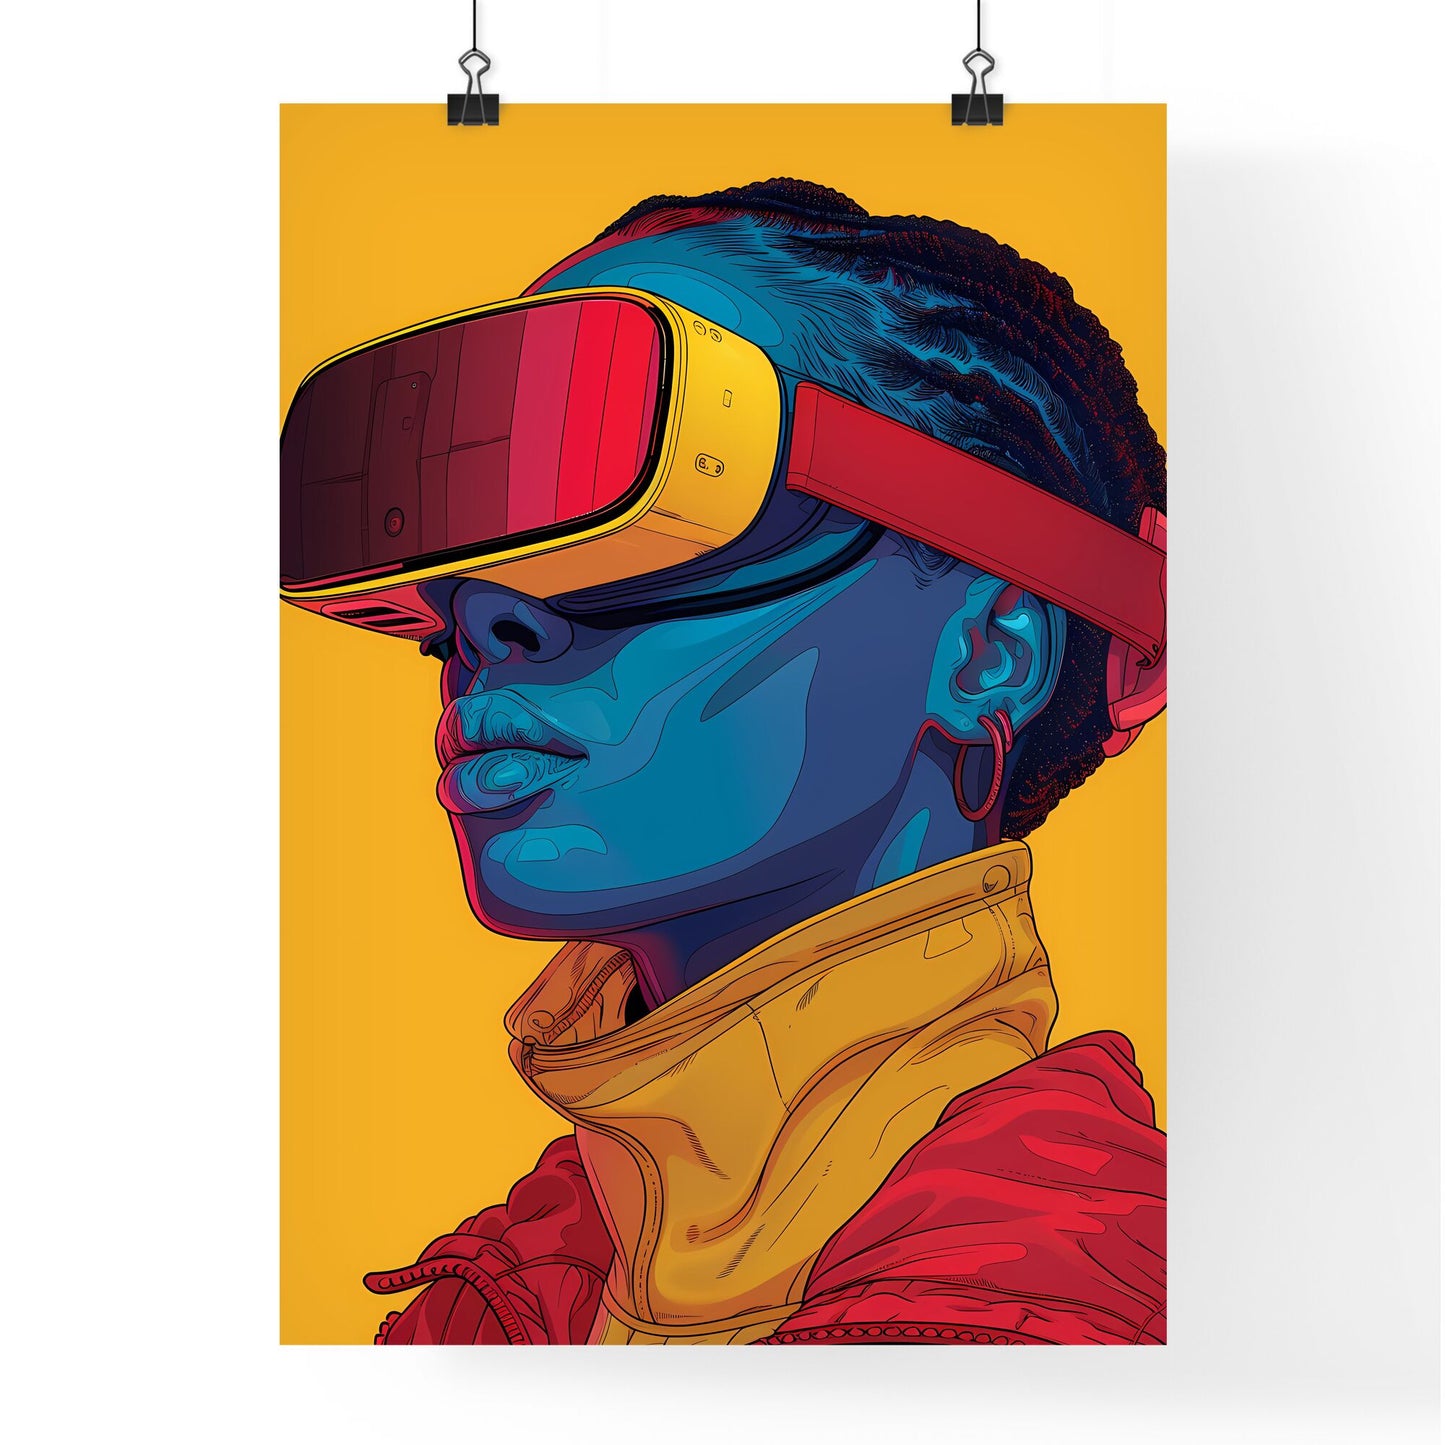 African woman wearing VR headset immersed in vibrant abstract art with modern African design in pastel colors, showcasing female empowerment and technology Default Title